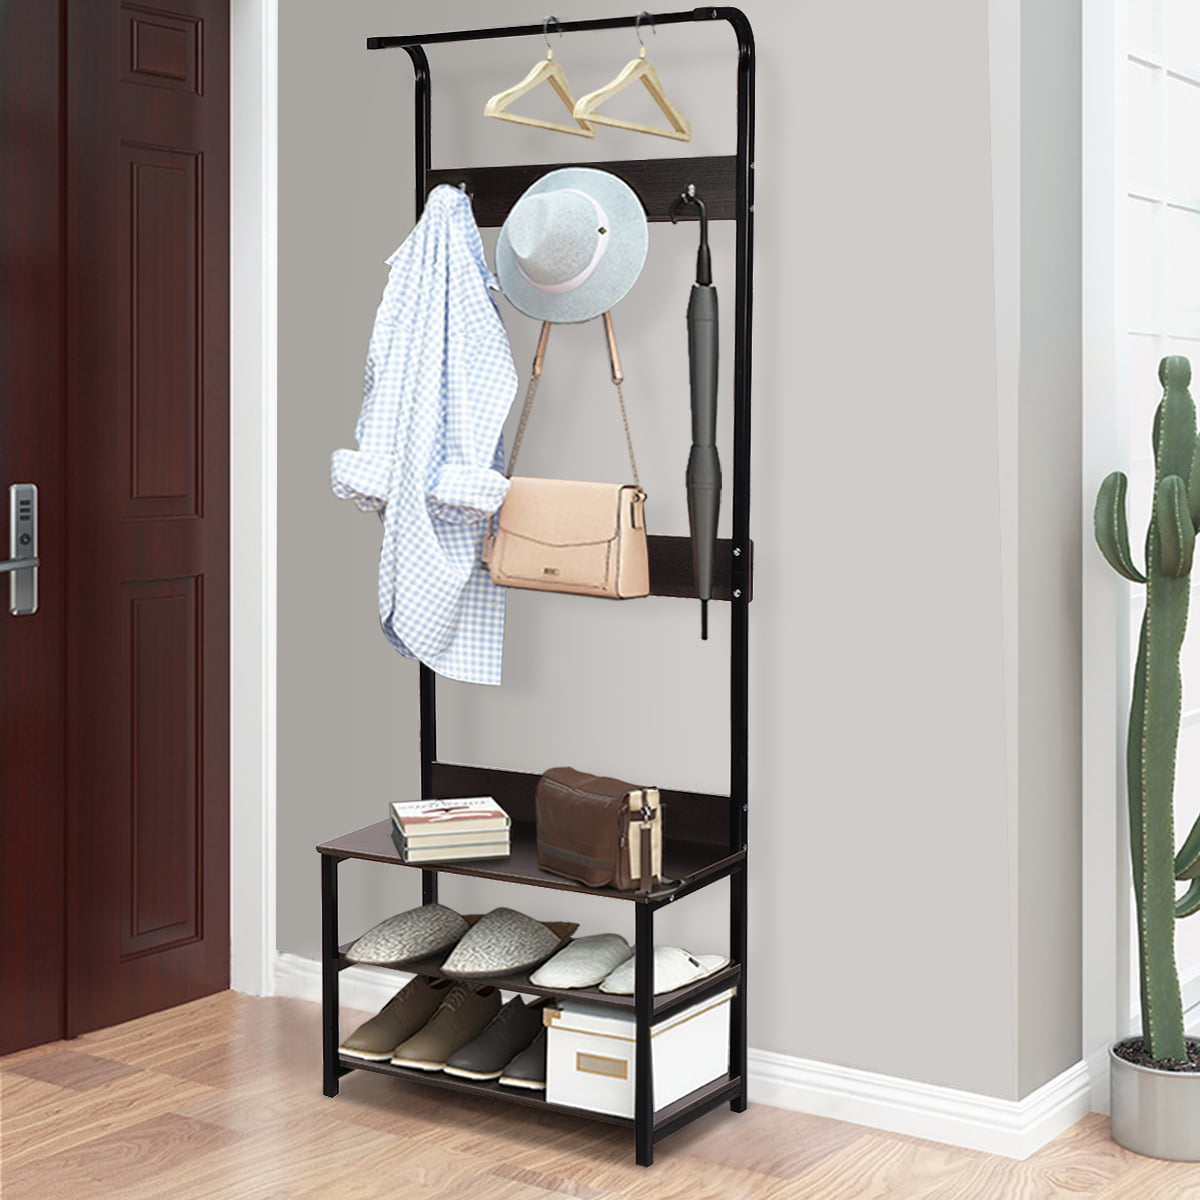 170cm Hall Tree Hat and Coat Stand Hallway Shoe Rack Bench with Shelves Hooks 